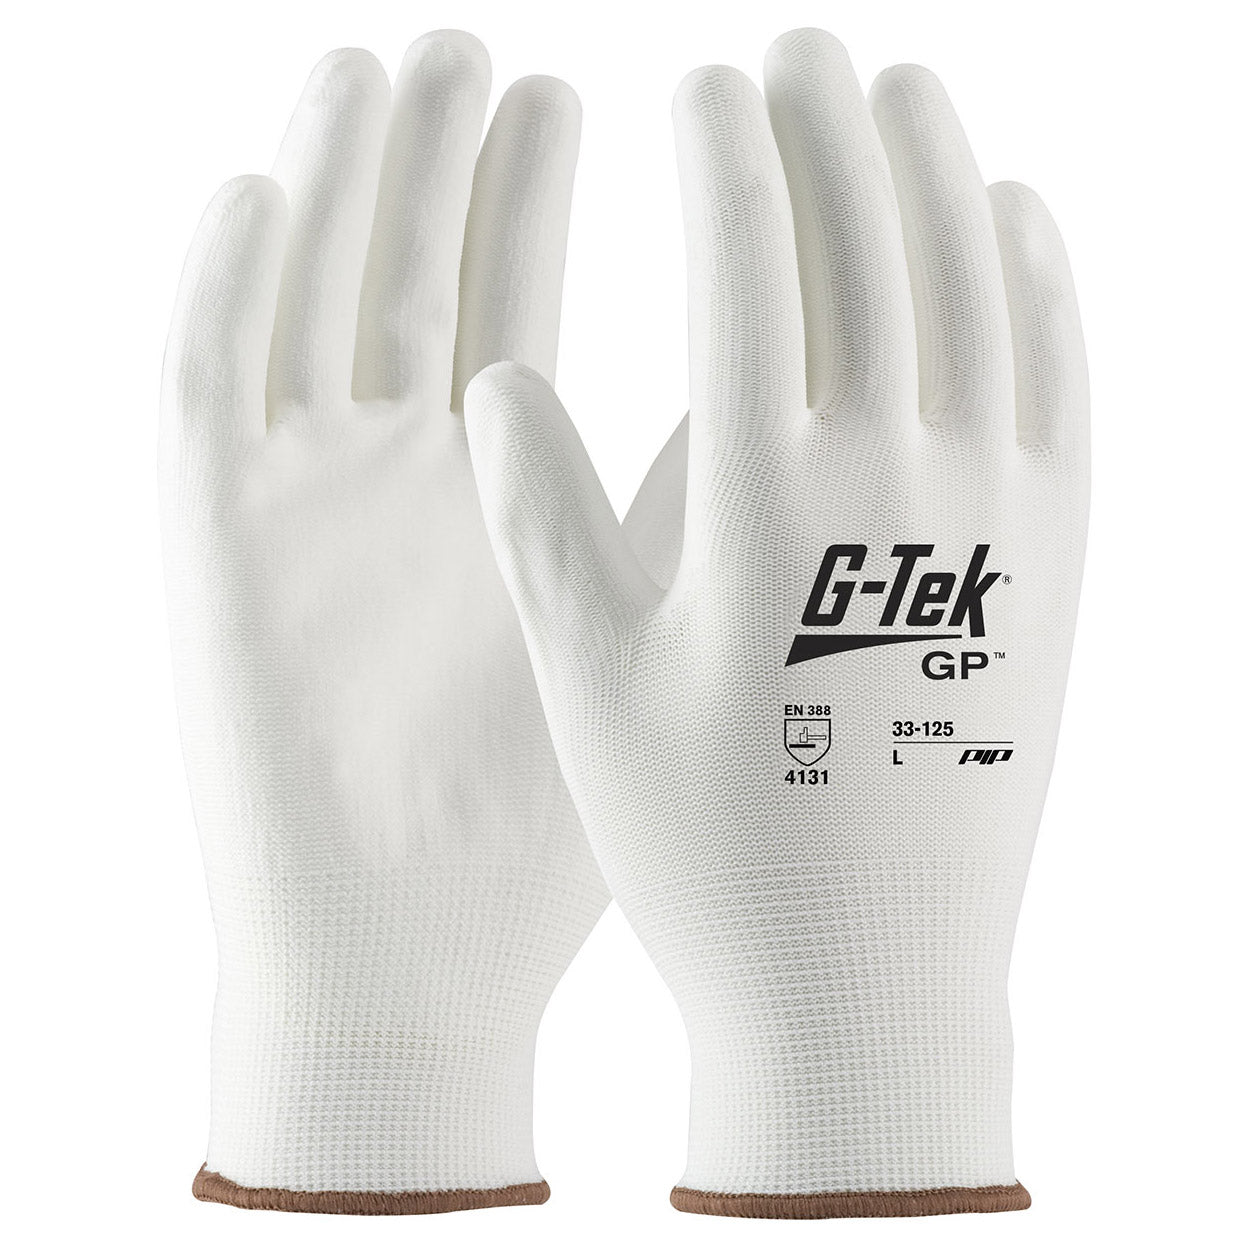 PIP 33-125 G-Tek NP Seamless Knit Nylon Gloves - Polyurethane Coated Smooth Grip on Palm & Fingers (12 Pairs)-eSafety Supplies, Inc